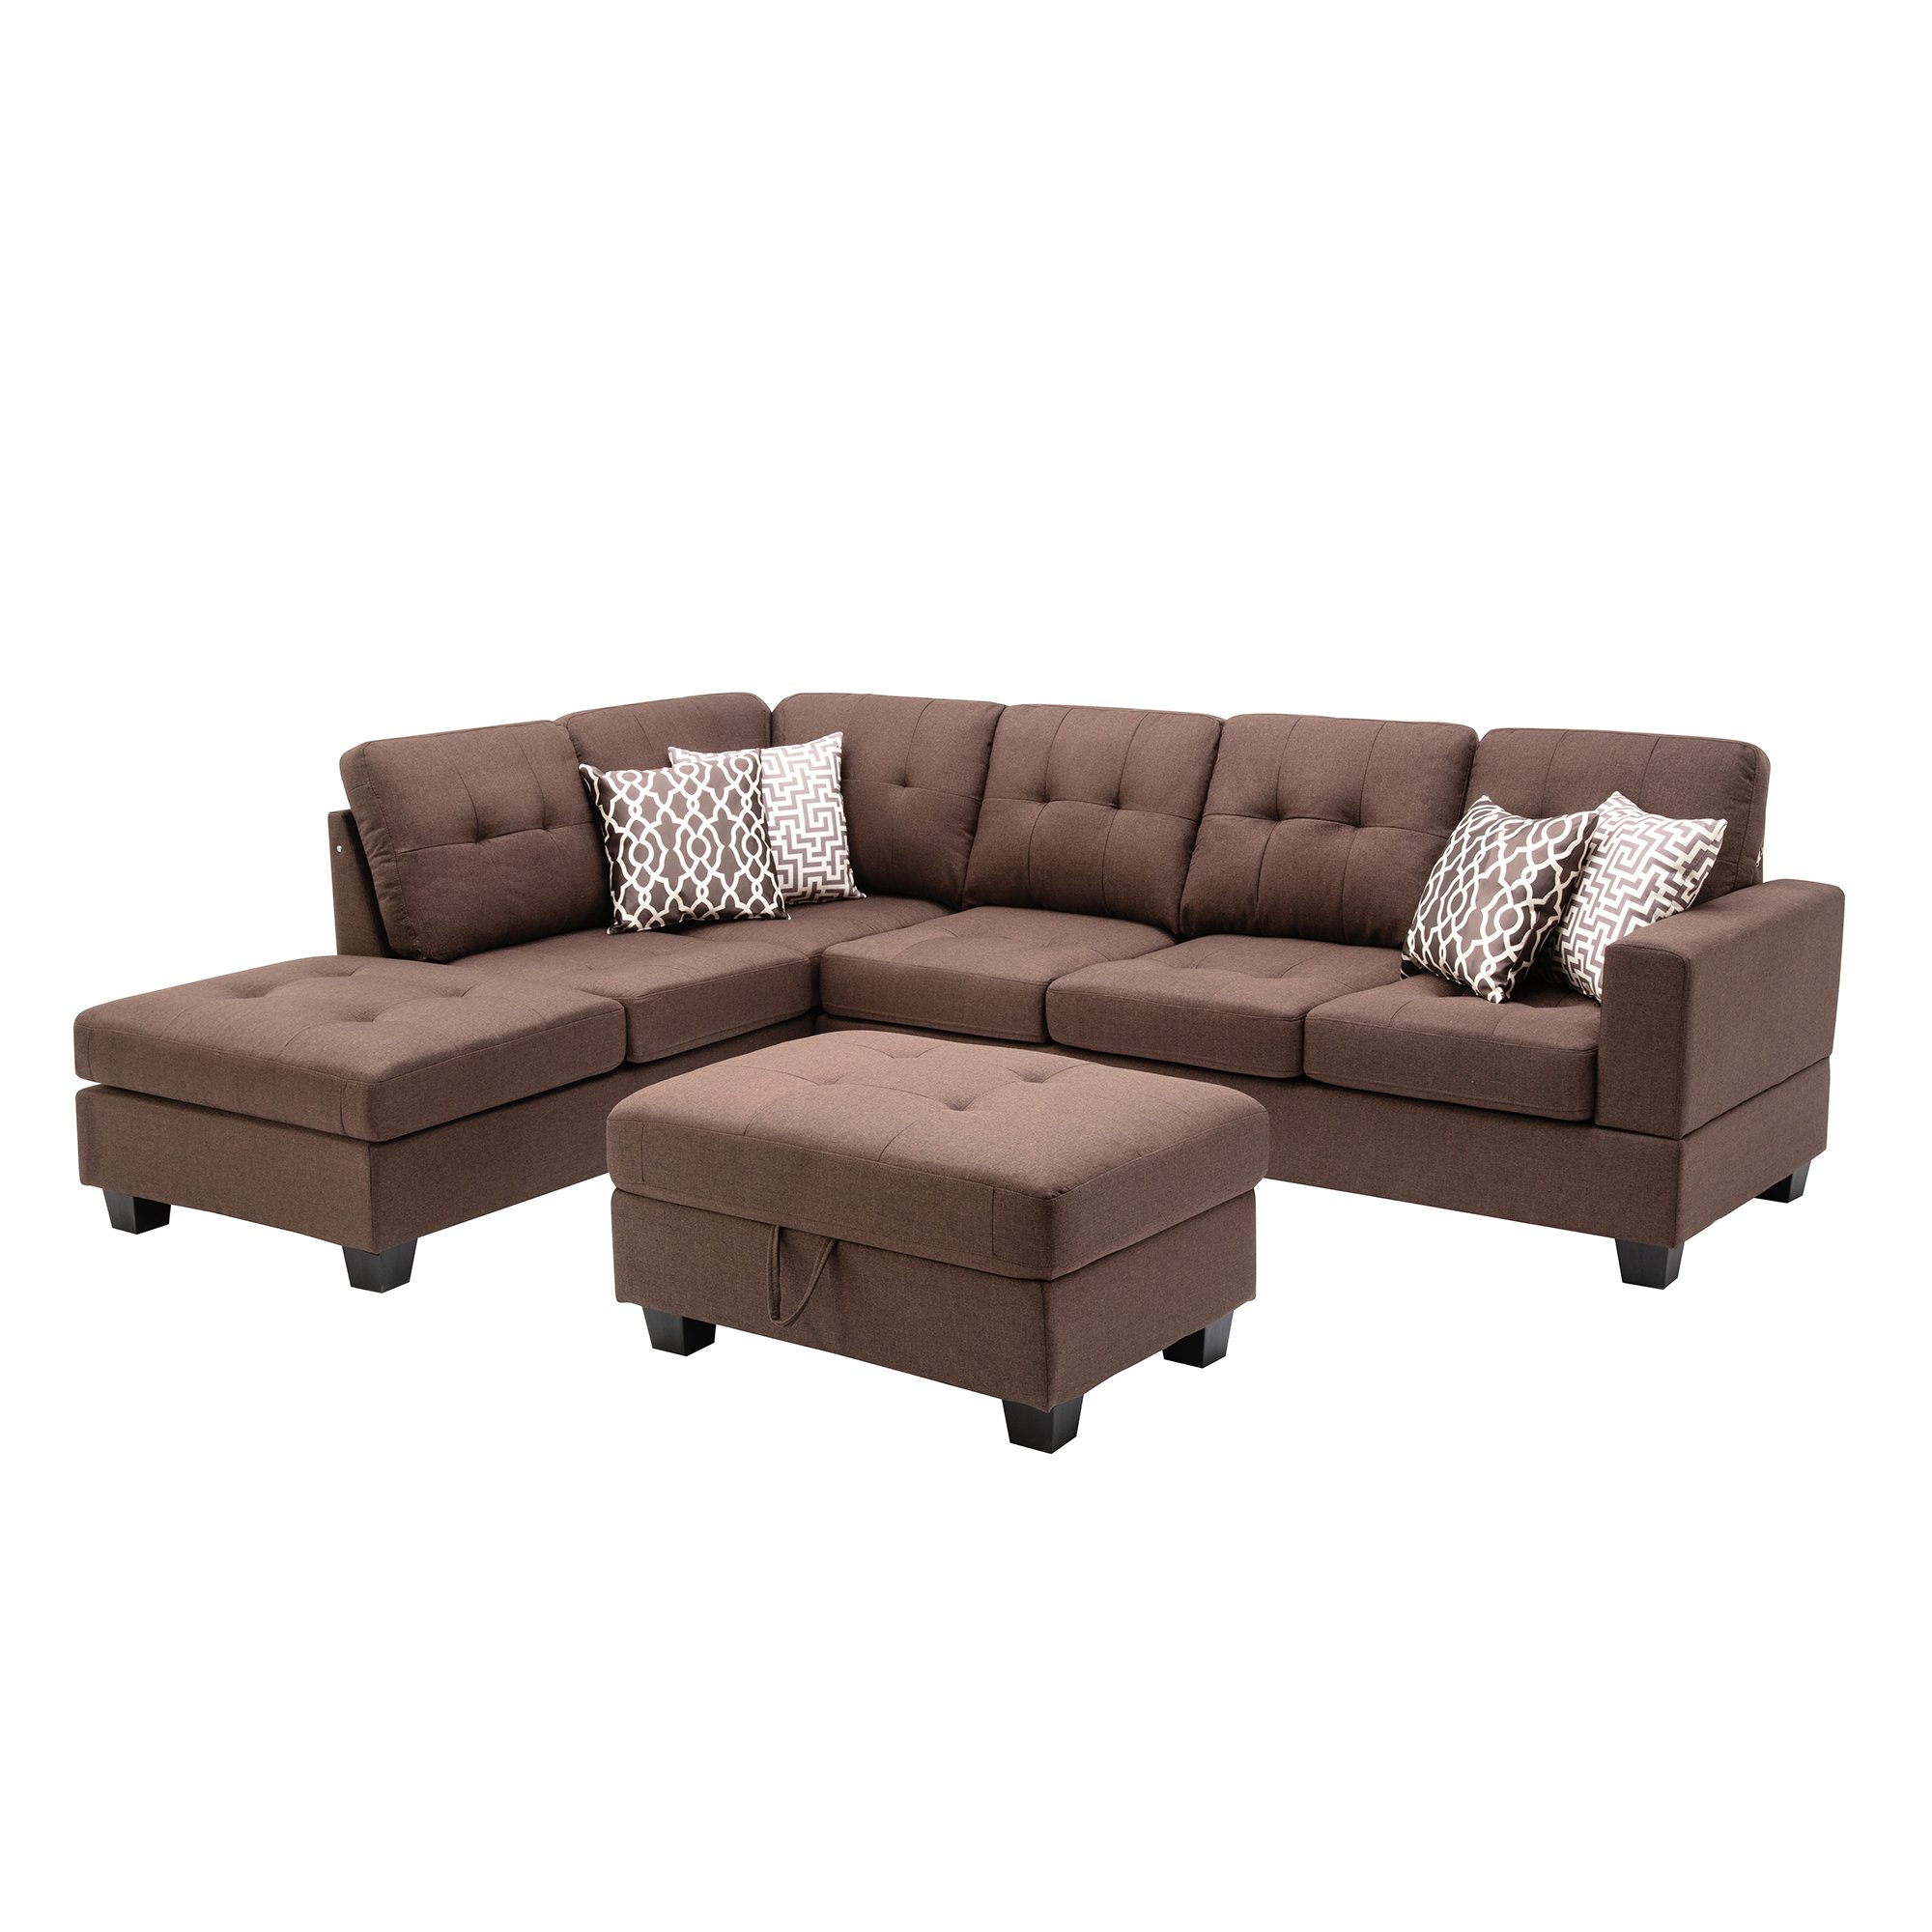 Reversible Sectional Sofa with 2 Outlets & USB Ports, Storage Ottoman Cup Holders Design & 4 Pillows-CASAINC